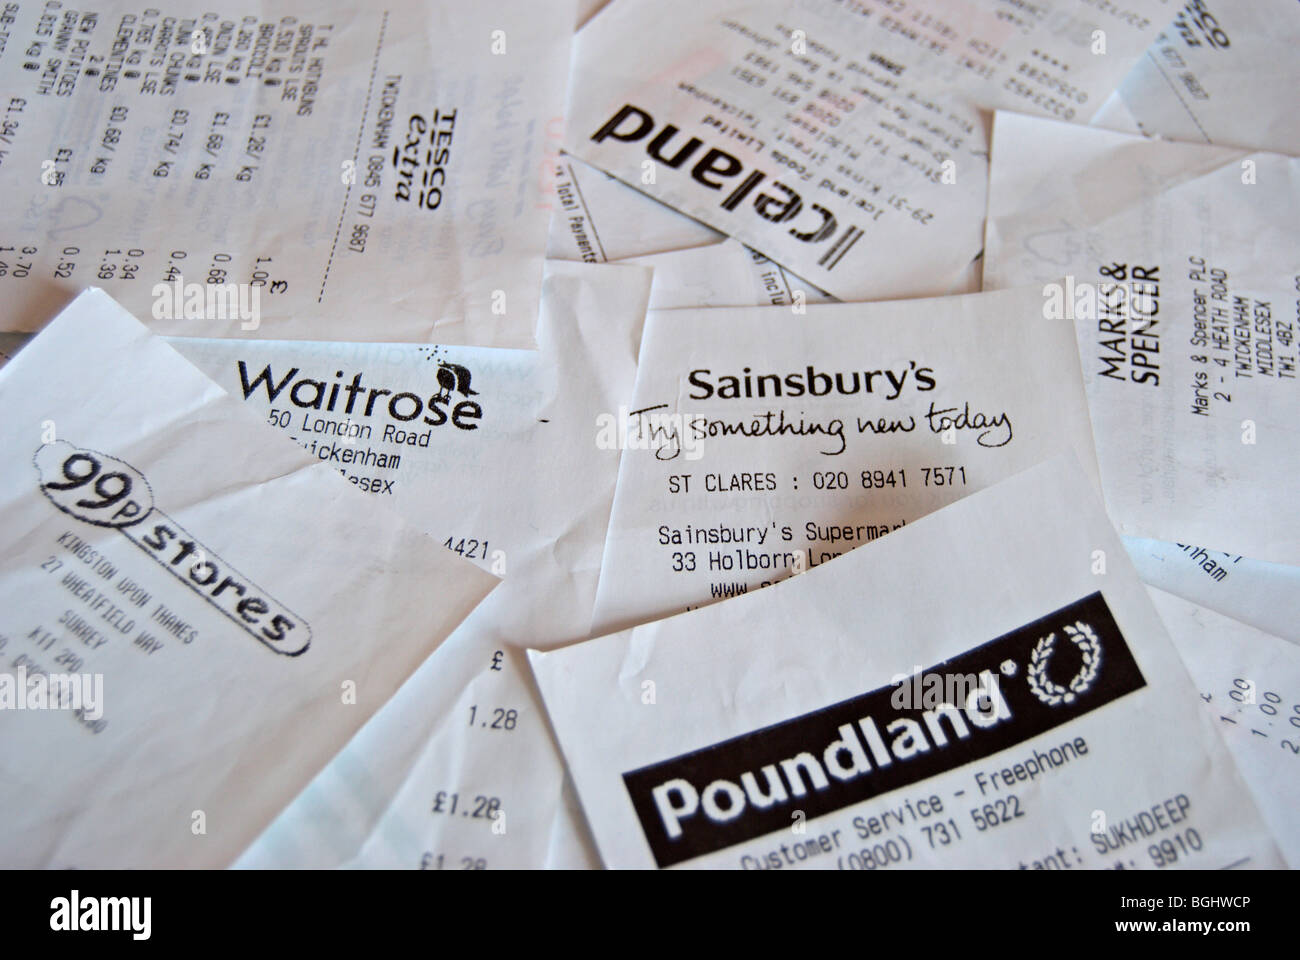 scattered till receipts from british supermarkets Stock Photo